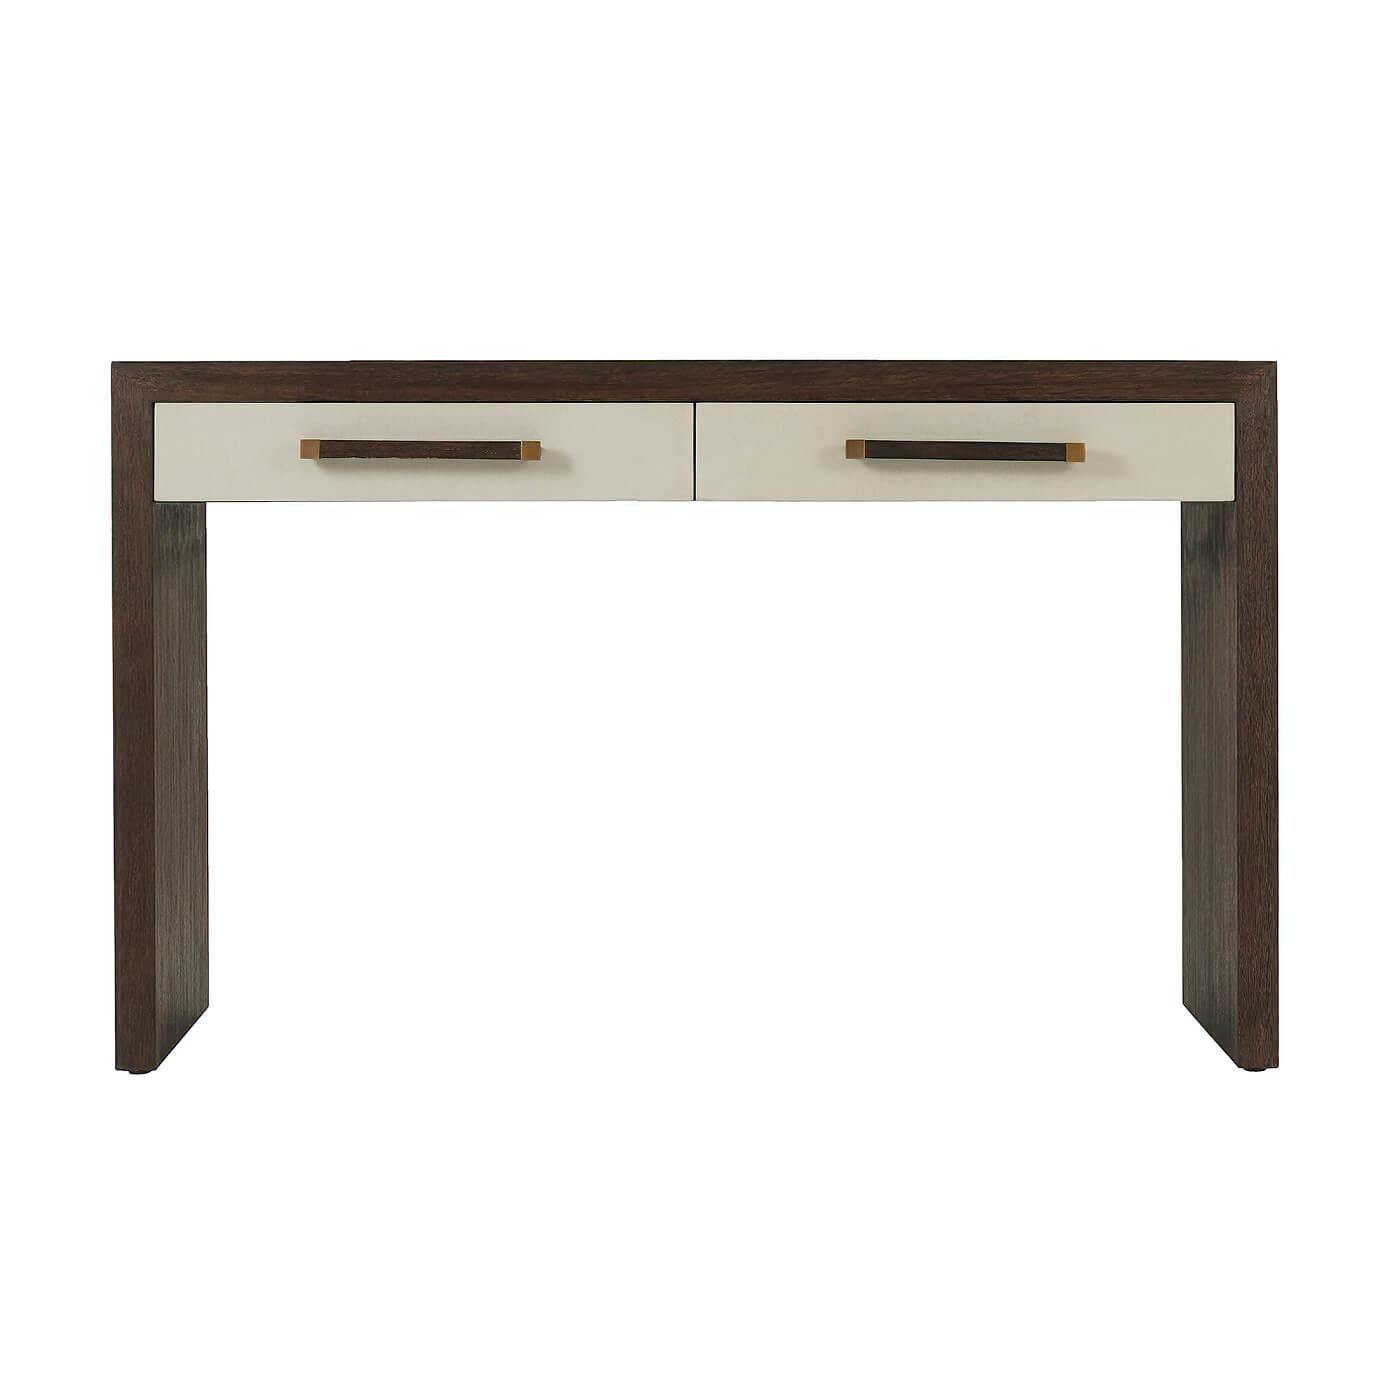 An elegant modern writing table with two singular leather-wrapped drawers, our Cardamon finish on the veneered frame (and handles) with panel end supports and brushed brass finish accents.

Dimensions: 49.25